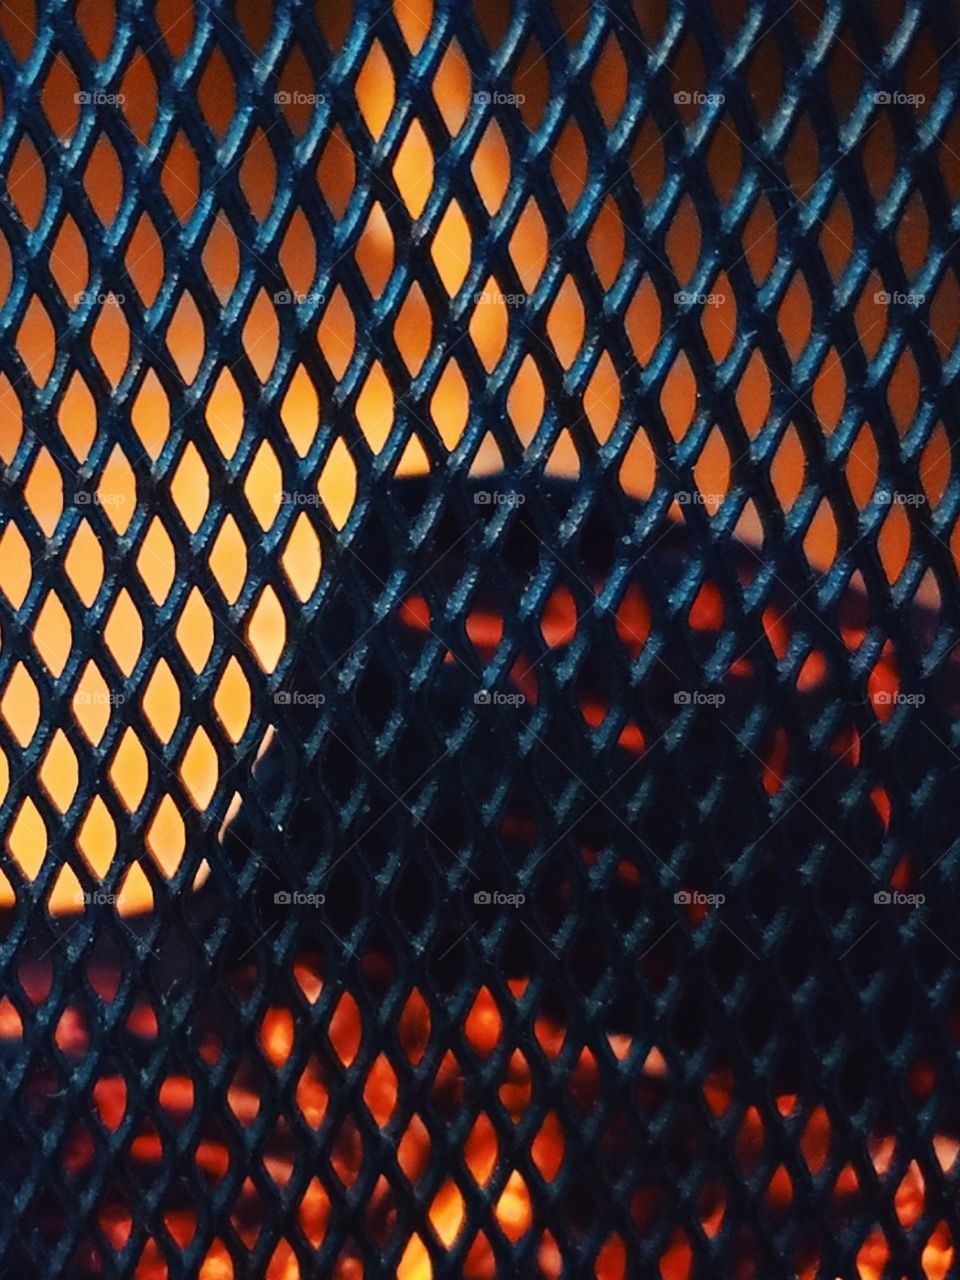 Fire glowing through the steel gate in a fire pit